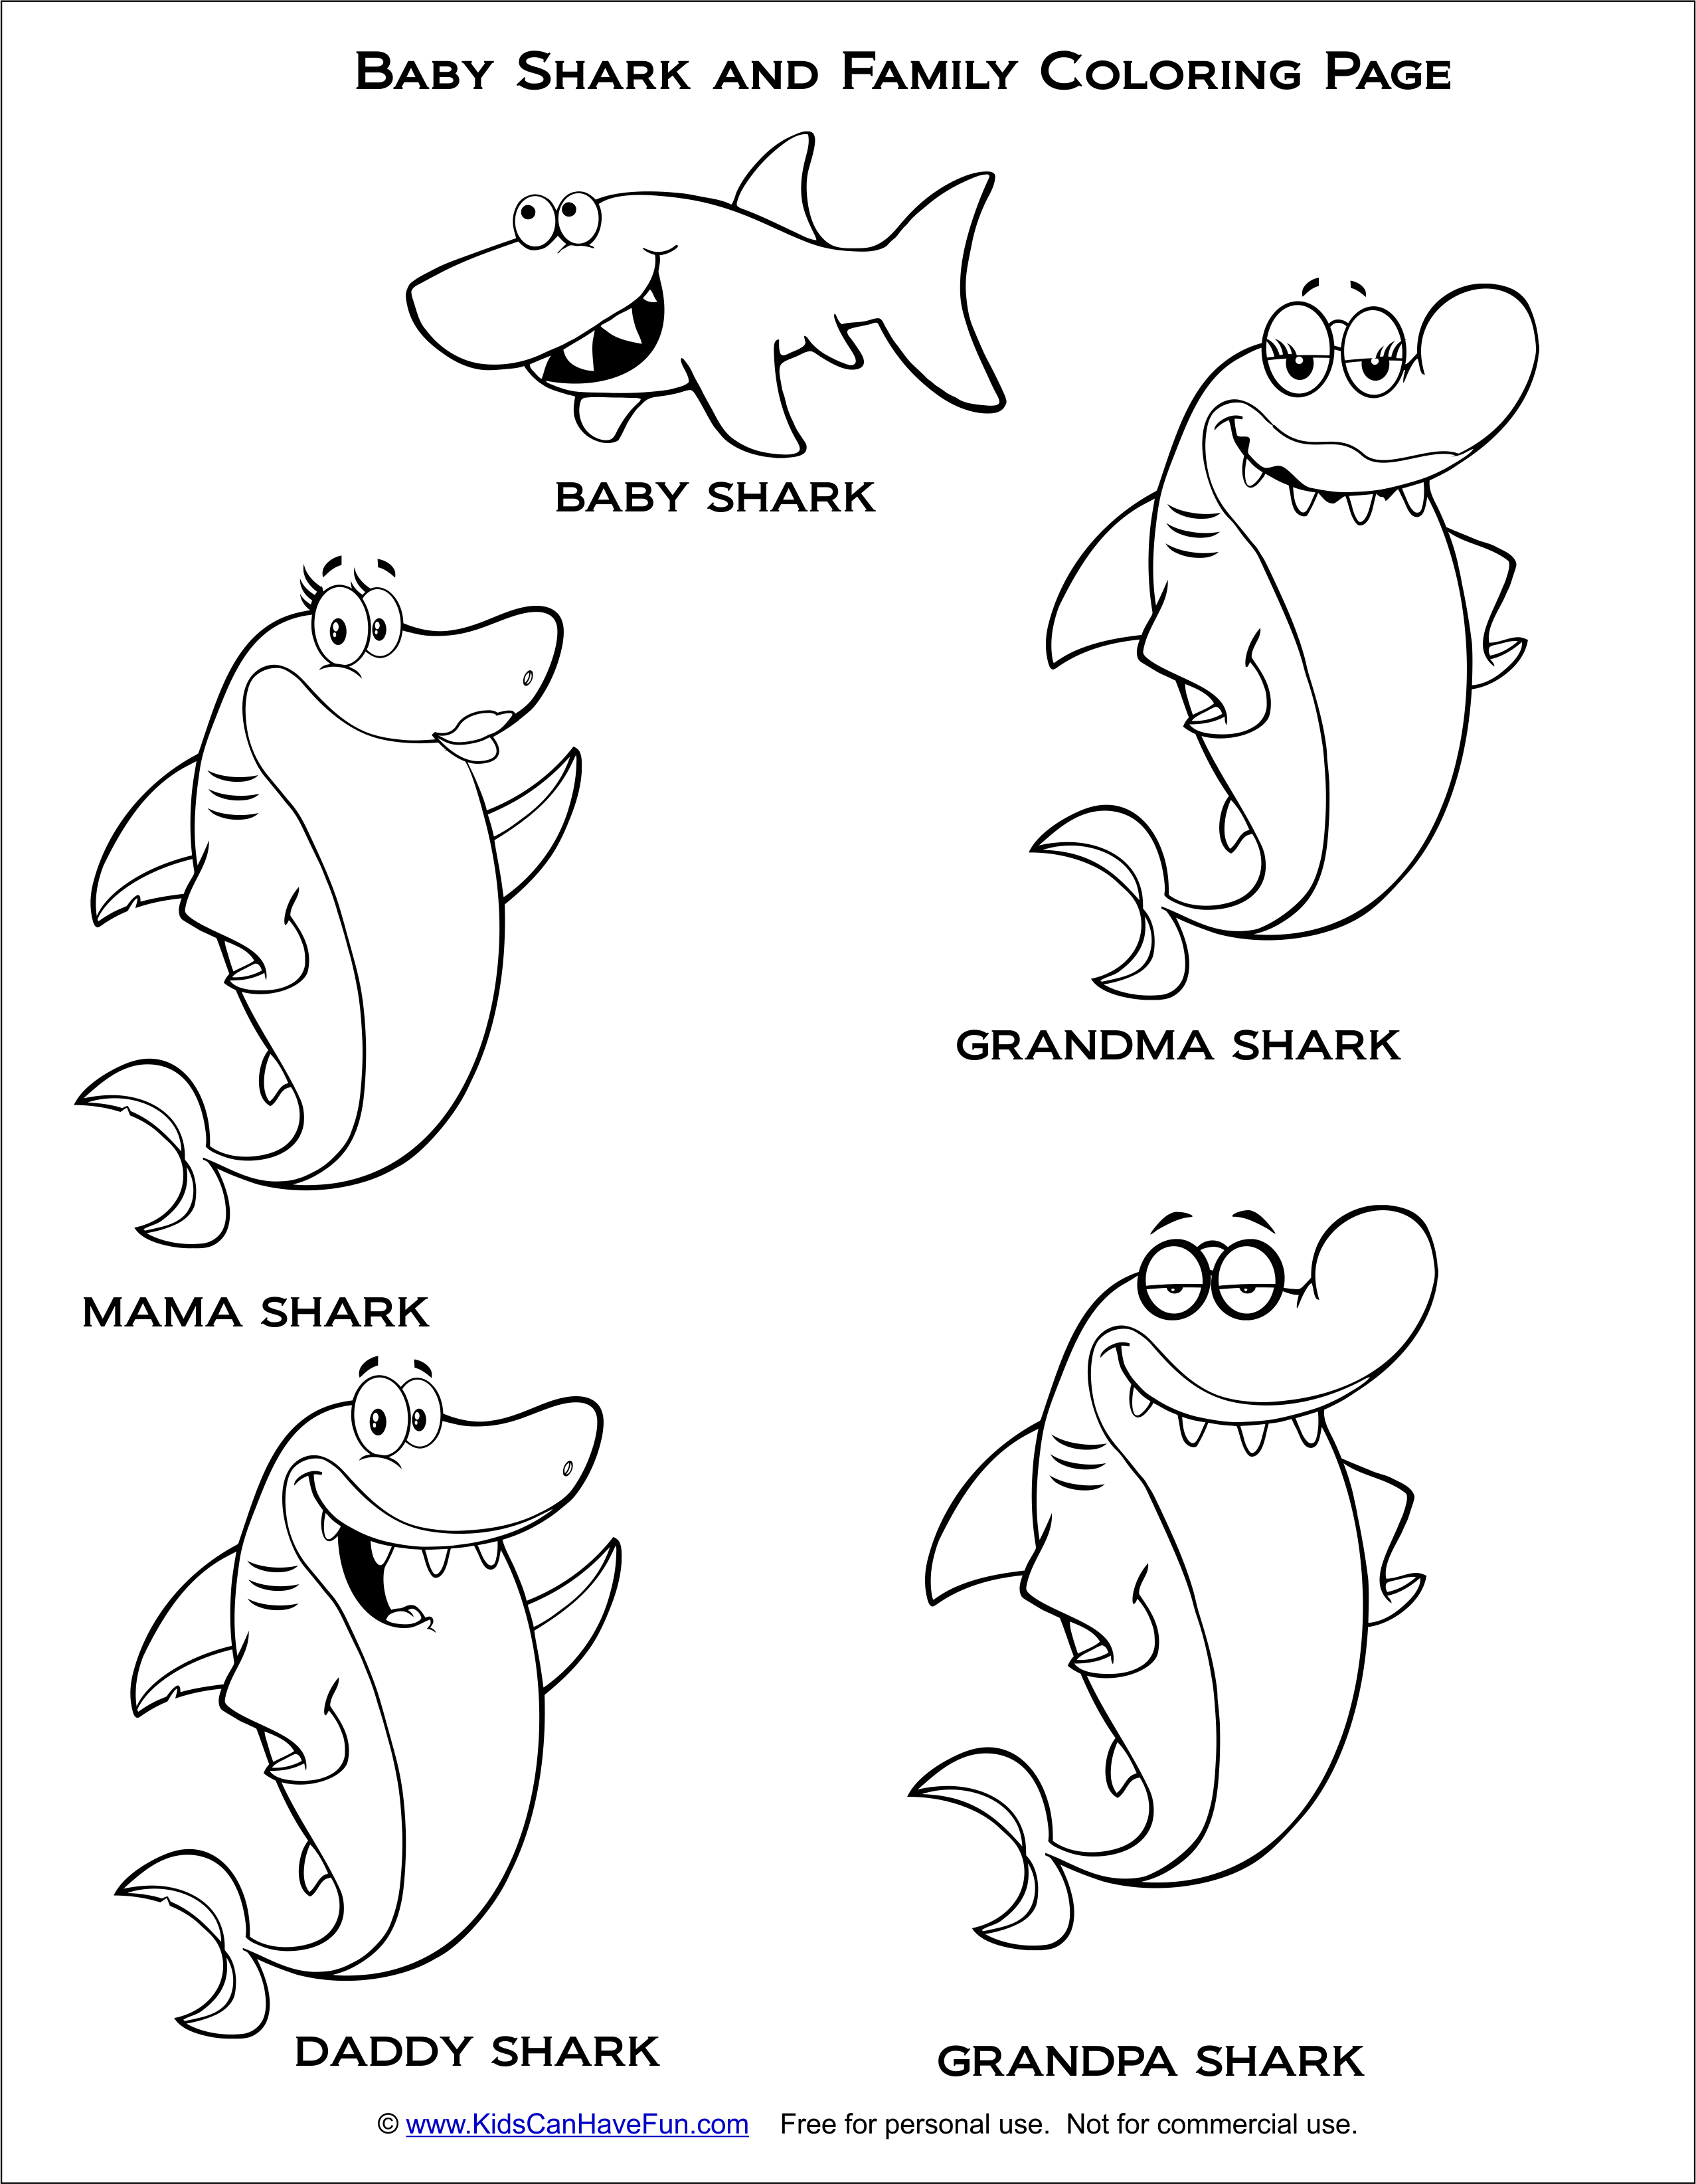 Baby Shark and family coloring page #babyshark #sharks ...